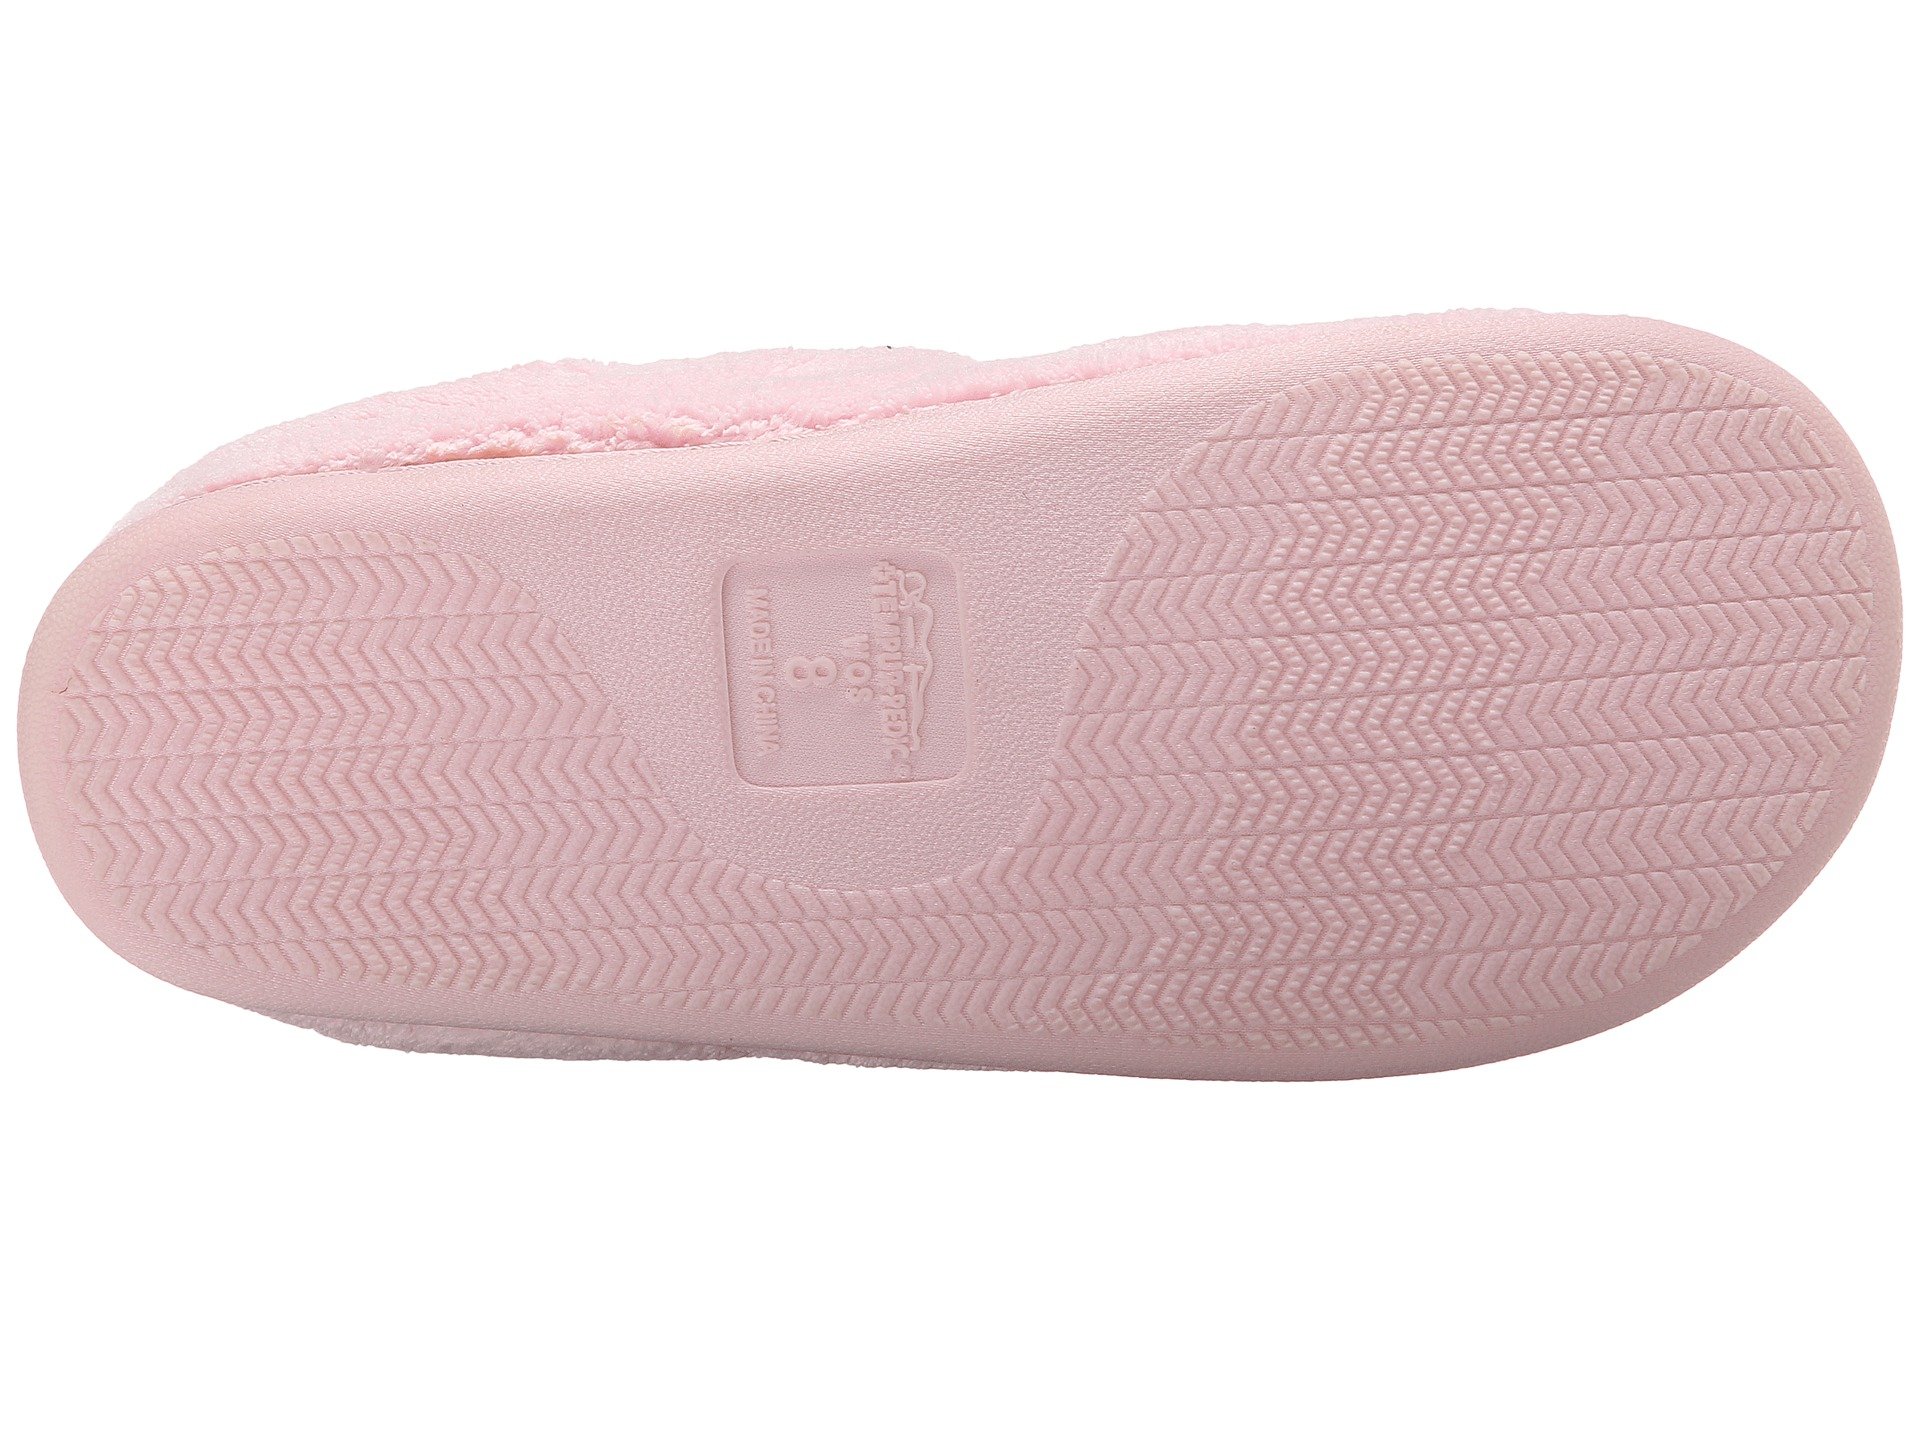 Open Back Terry Cloth House Slippers Tempur-Pedic Women's Windsock Spa Clog 